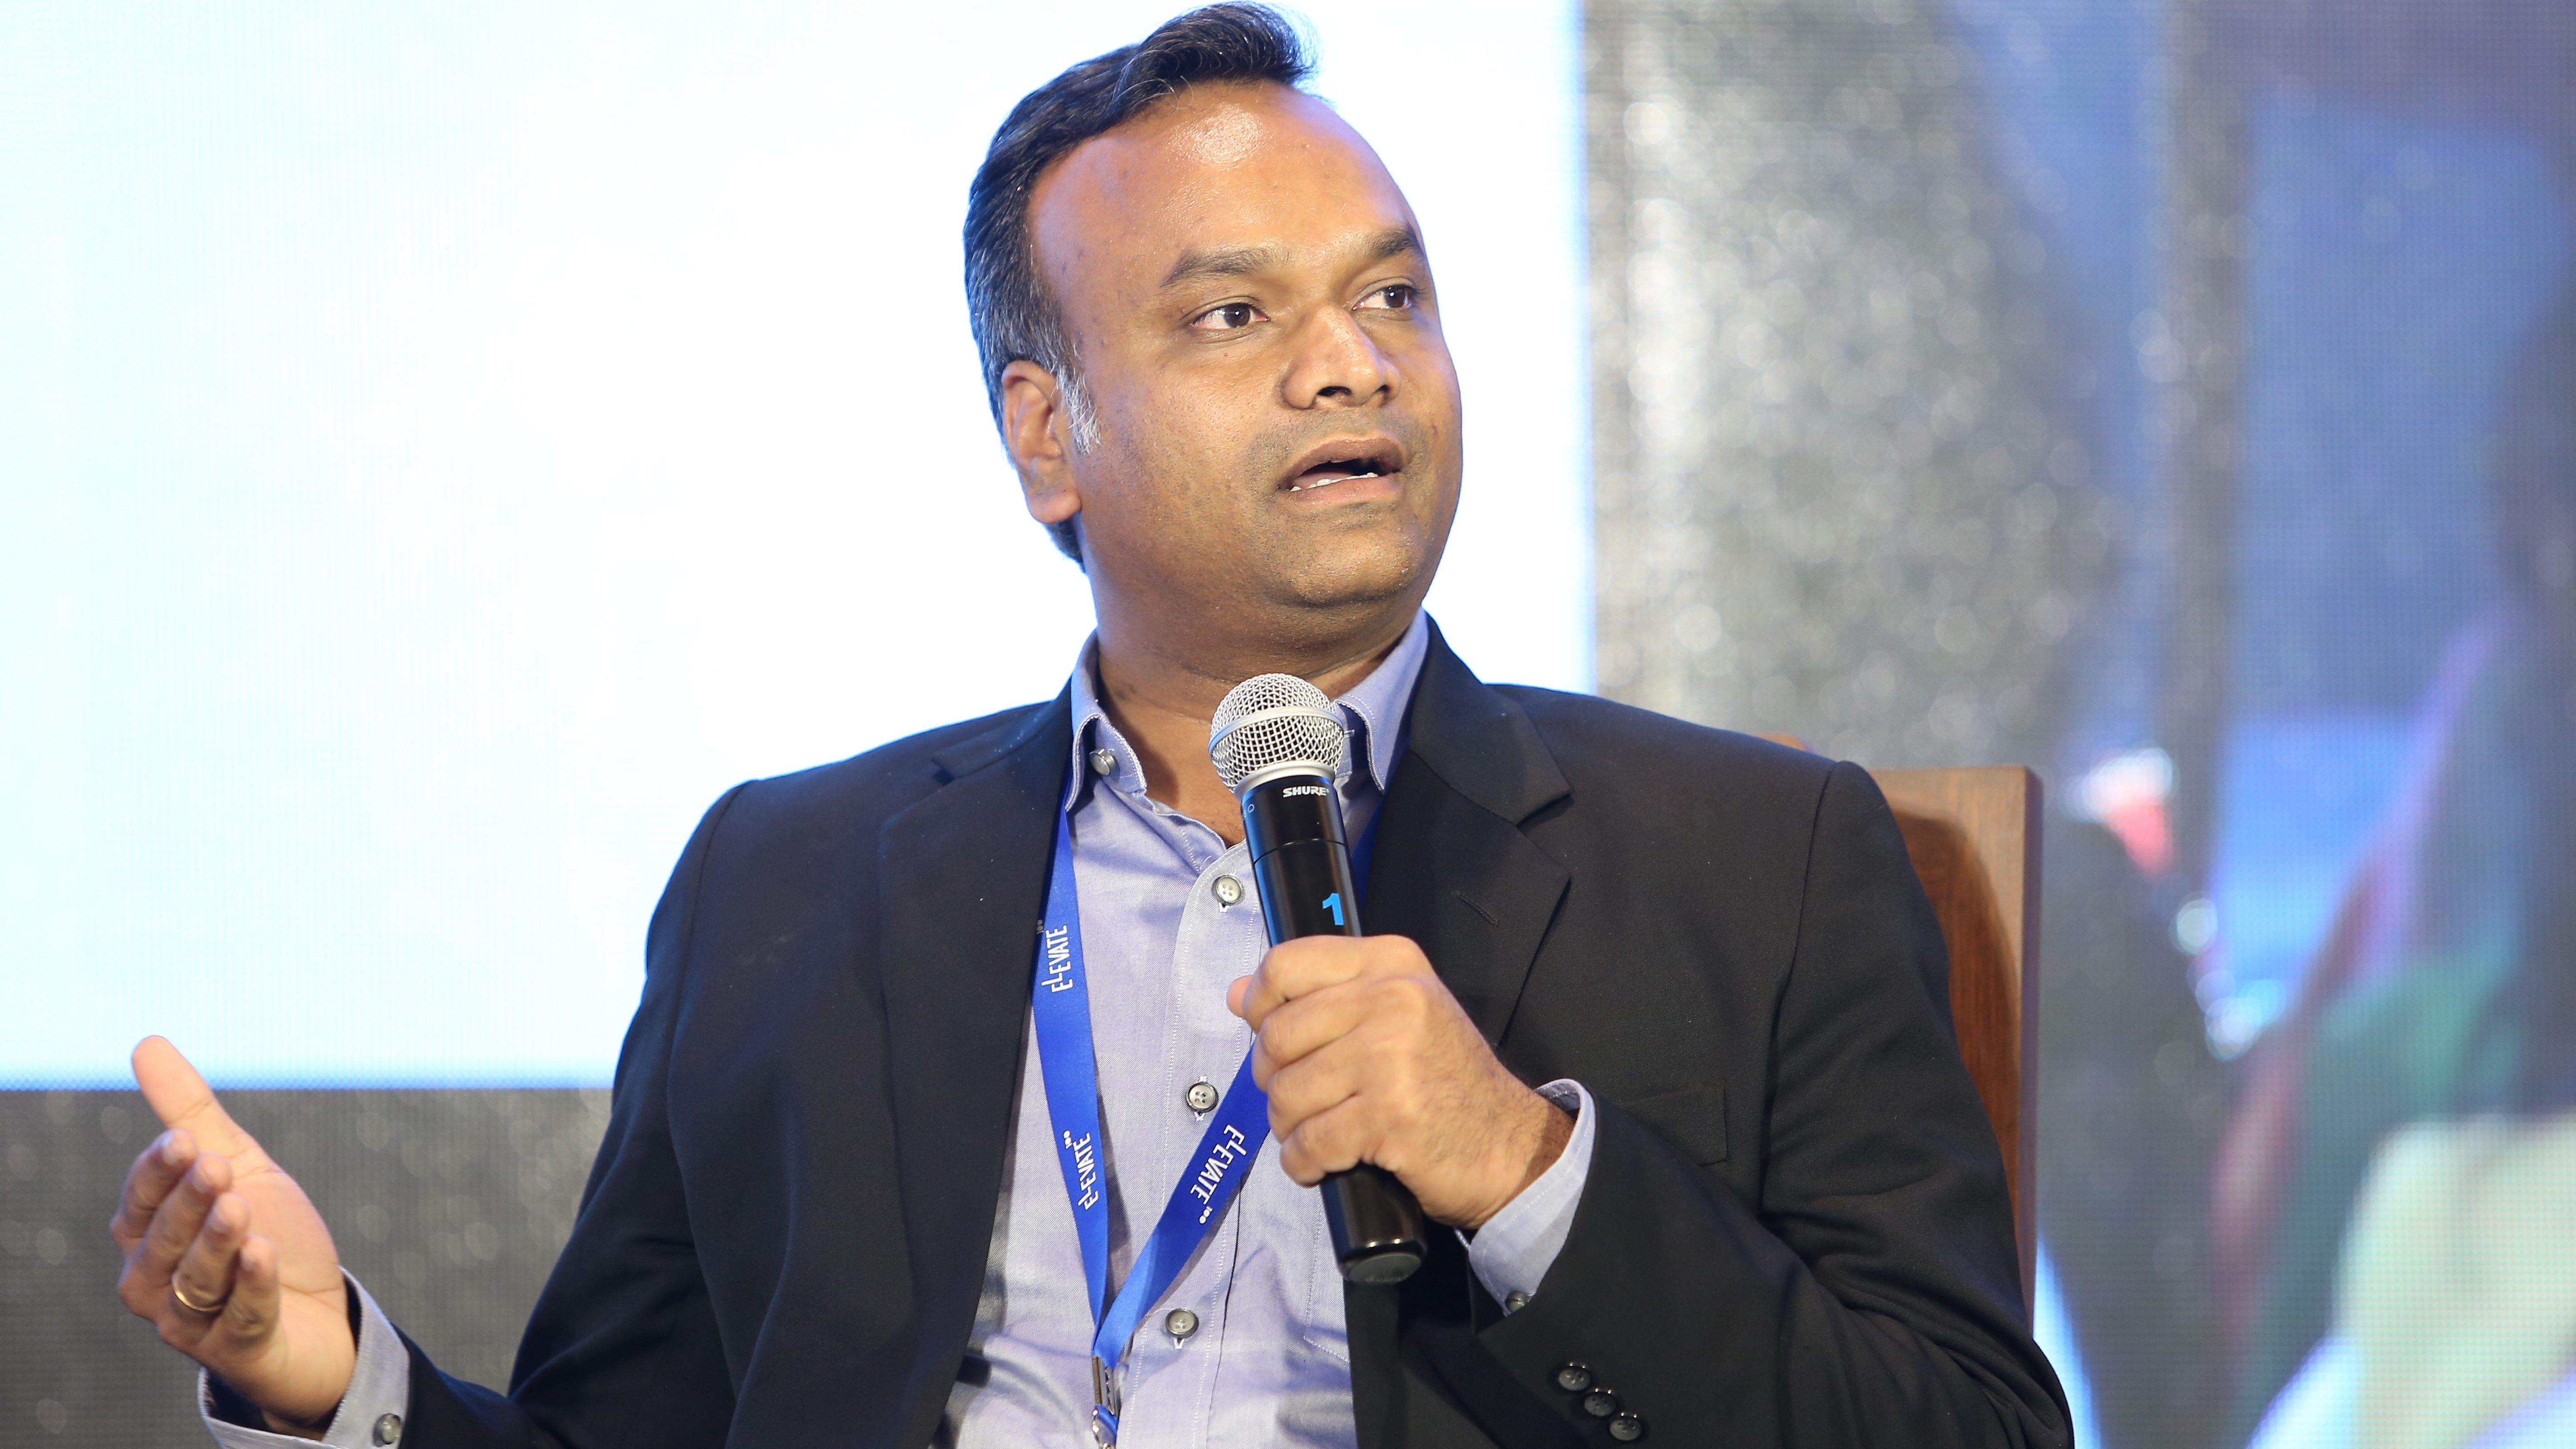 Elevate: Technology leadership is relevant to Karnataka’s success in IoT sector